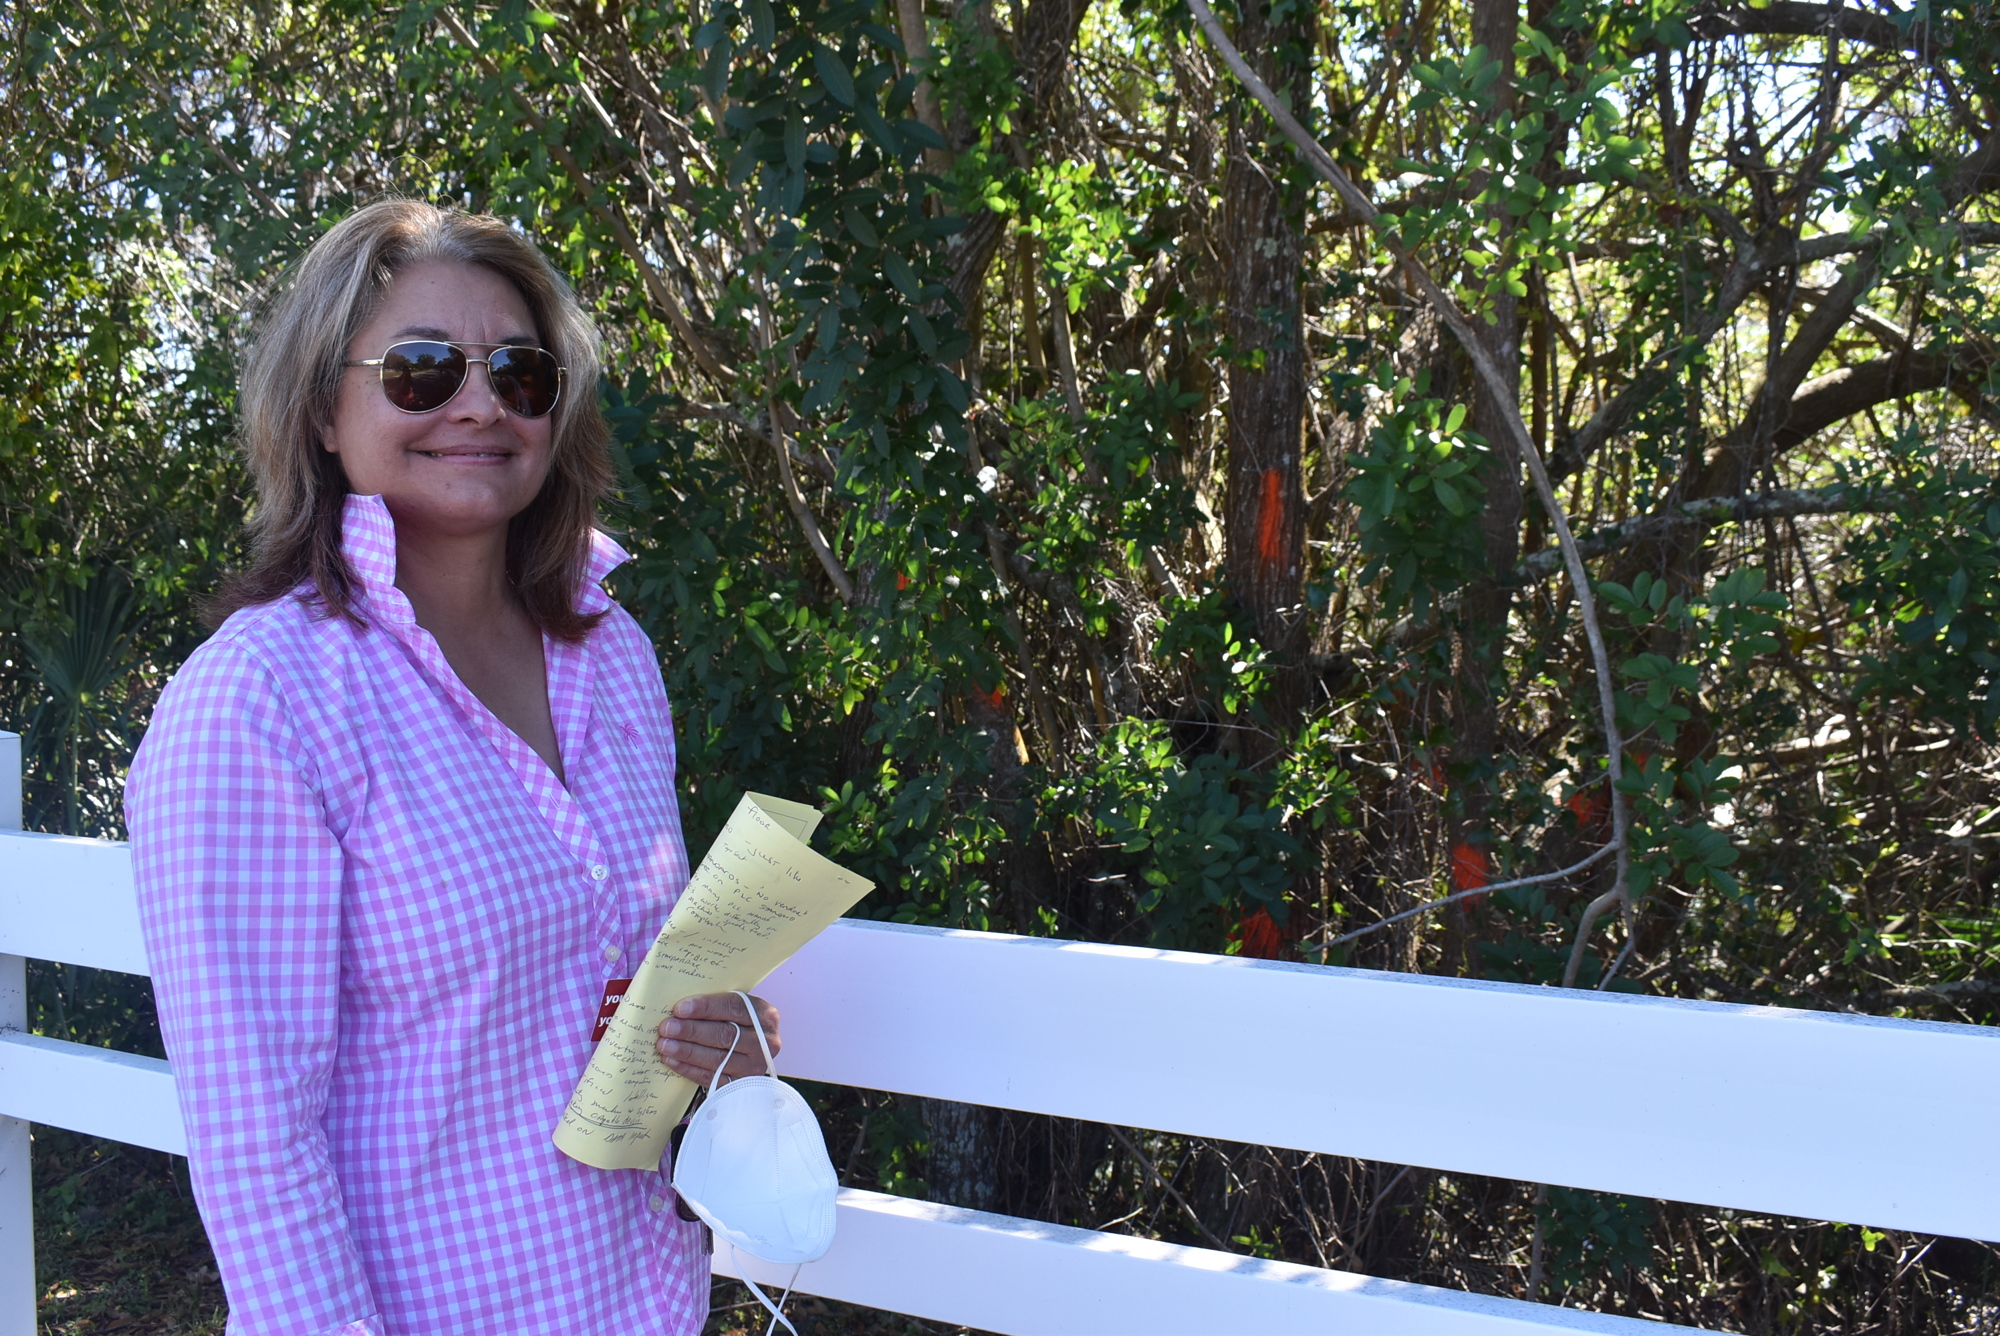 Mote Ranch HOA Board Director Brenda Miller is excited to remove invasive Brazilian pepper trees from Old Farm Road. She hopes the removal will allow native species to thrive, creating an 